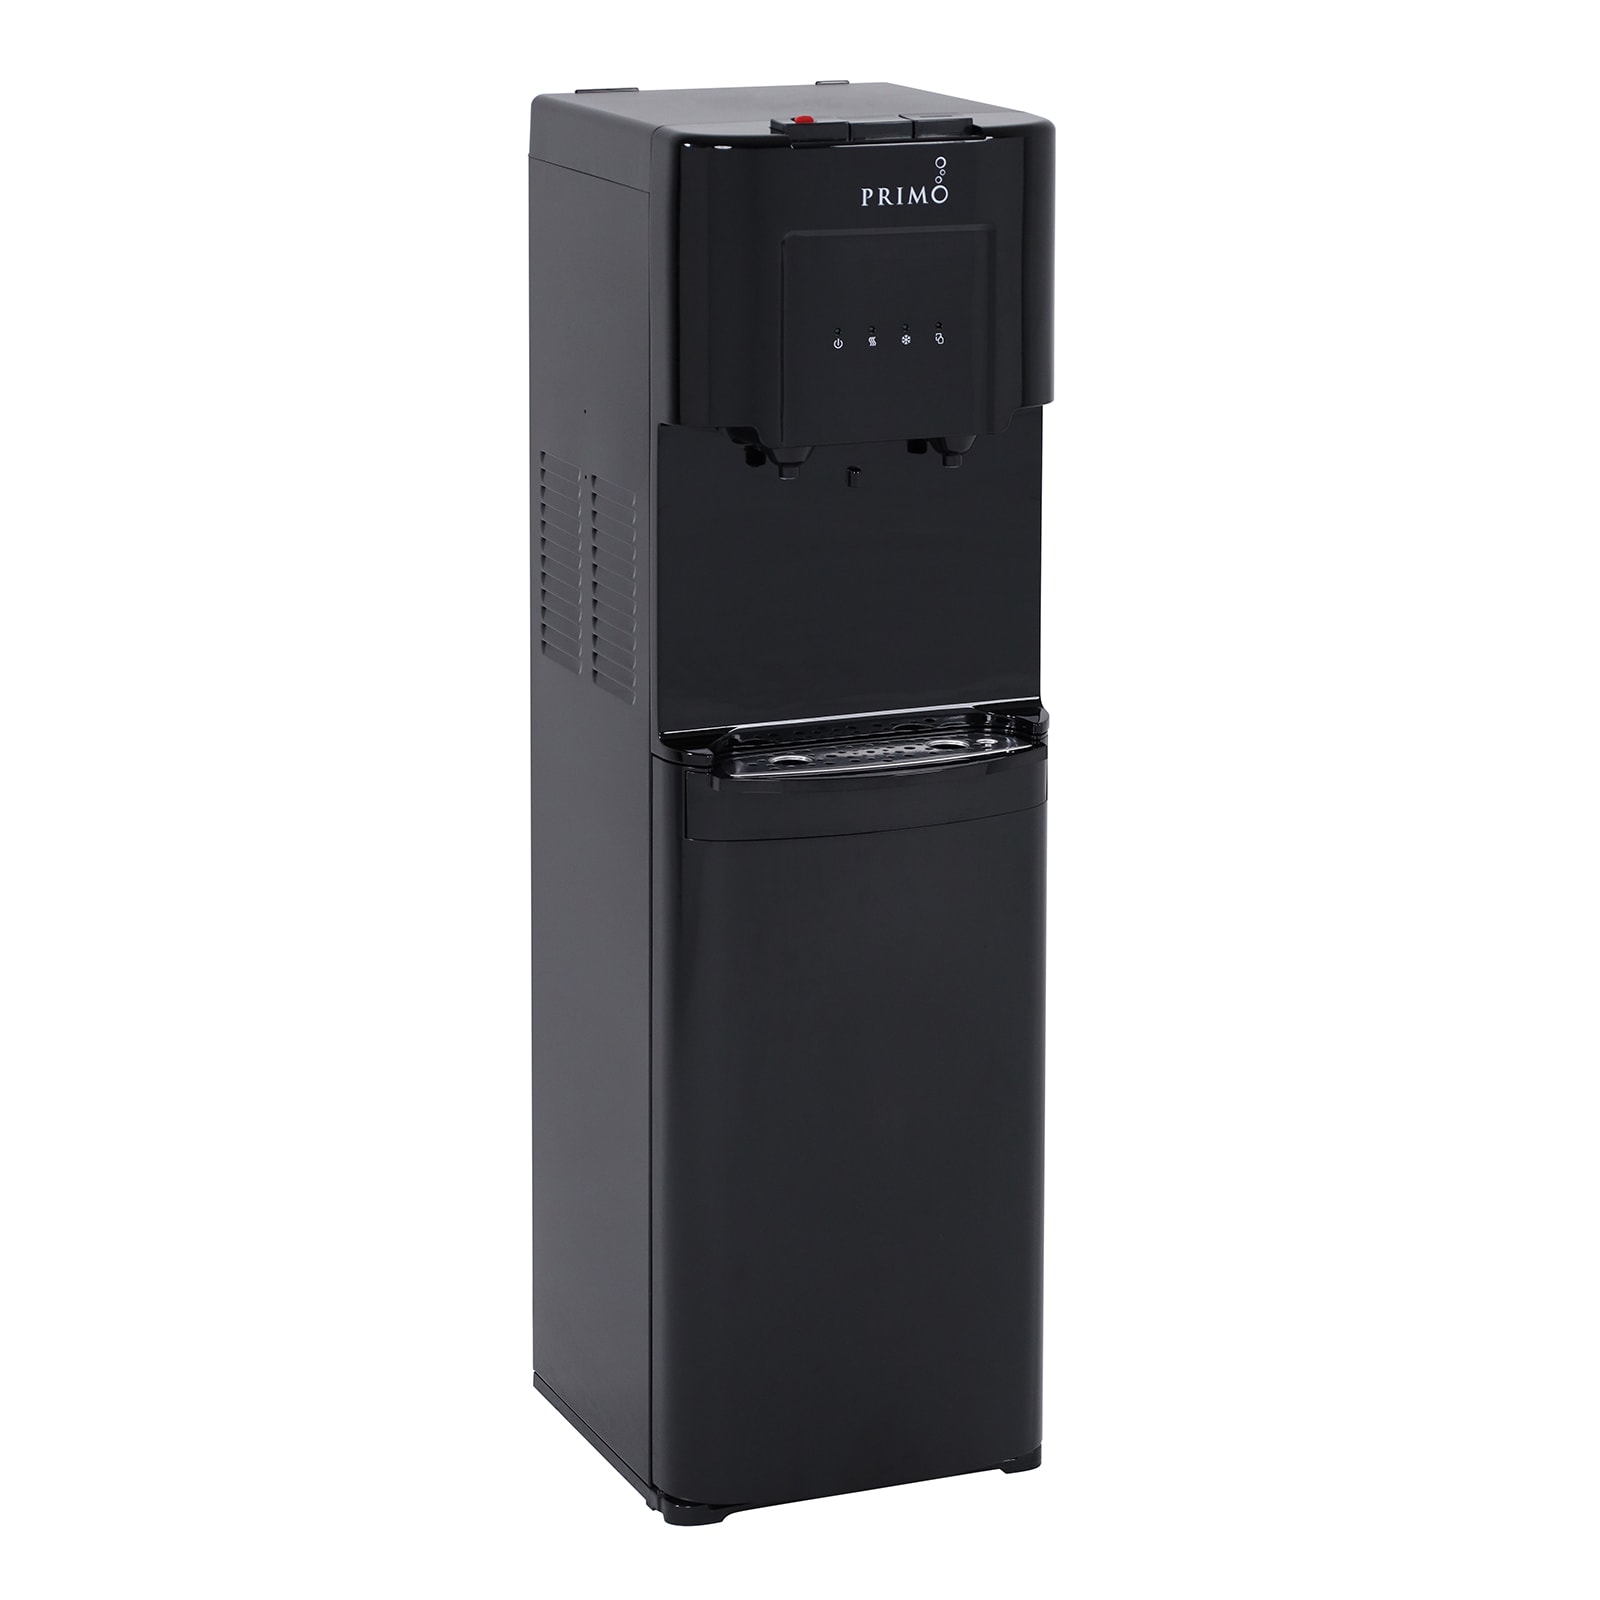 Avalon Self Cleaning Bottleless Water Cooler Water Dispenser 3 Temperature  Settings Hot Cold Room Water Durable Stainless Steel Cabinet NSF Certified  Filter ULEnergy Star Approved - Office Depot